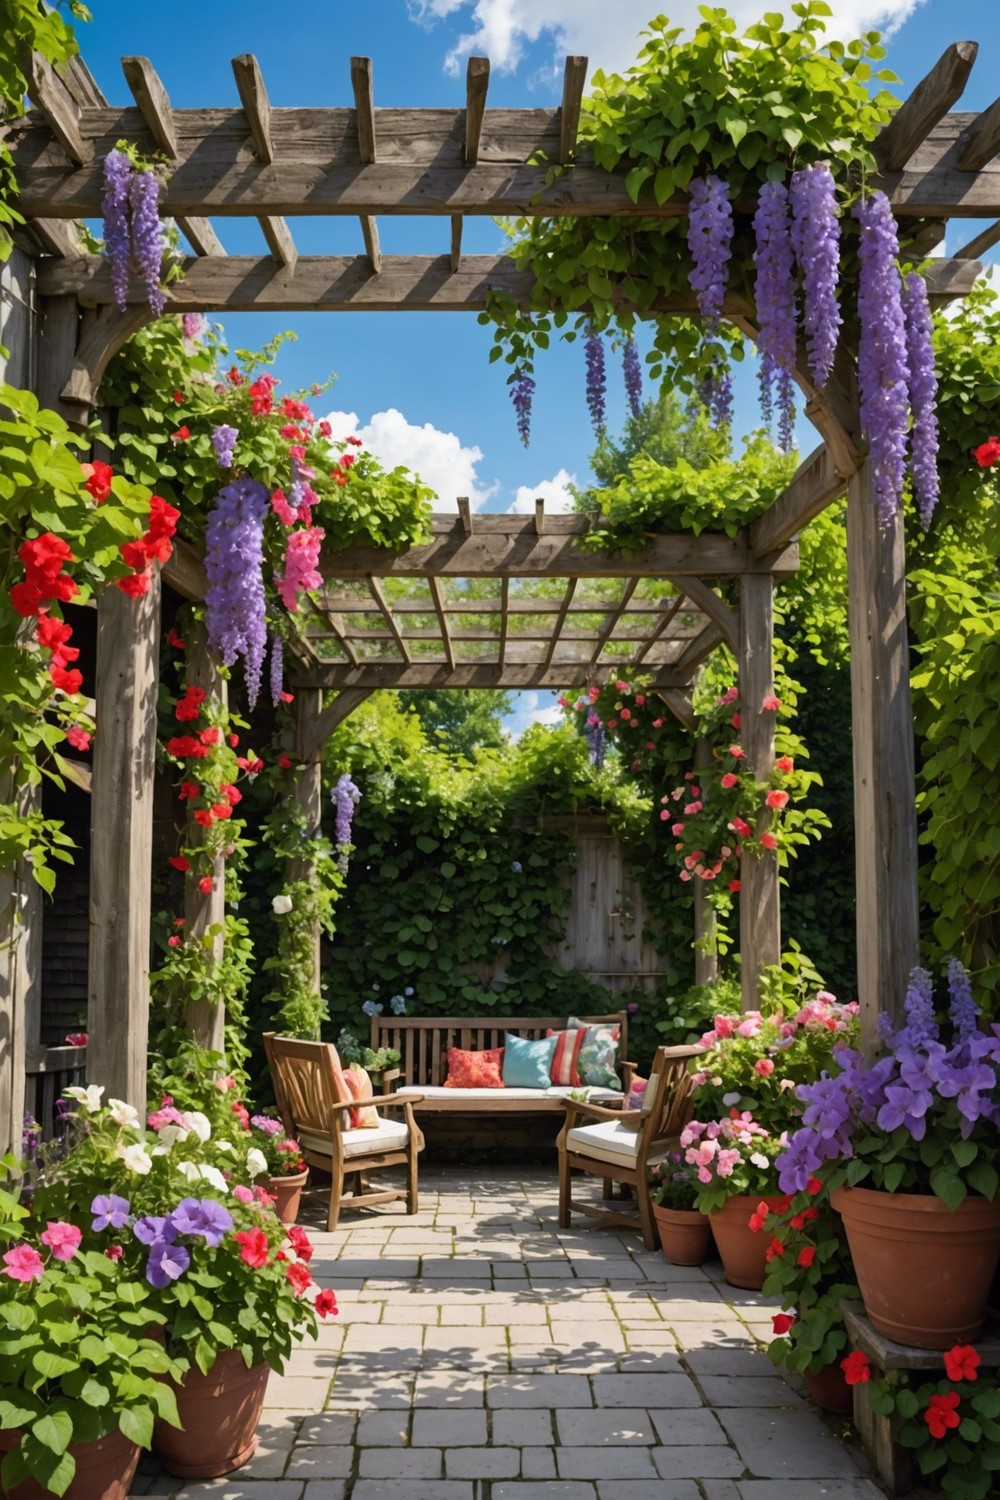 Pergola with Vines and Flowers